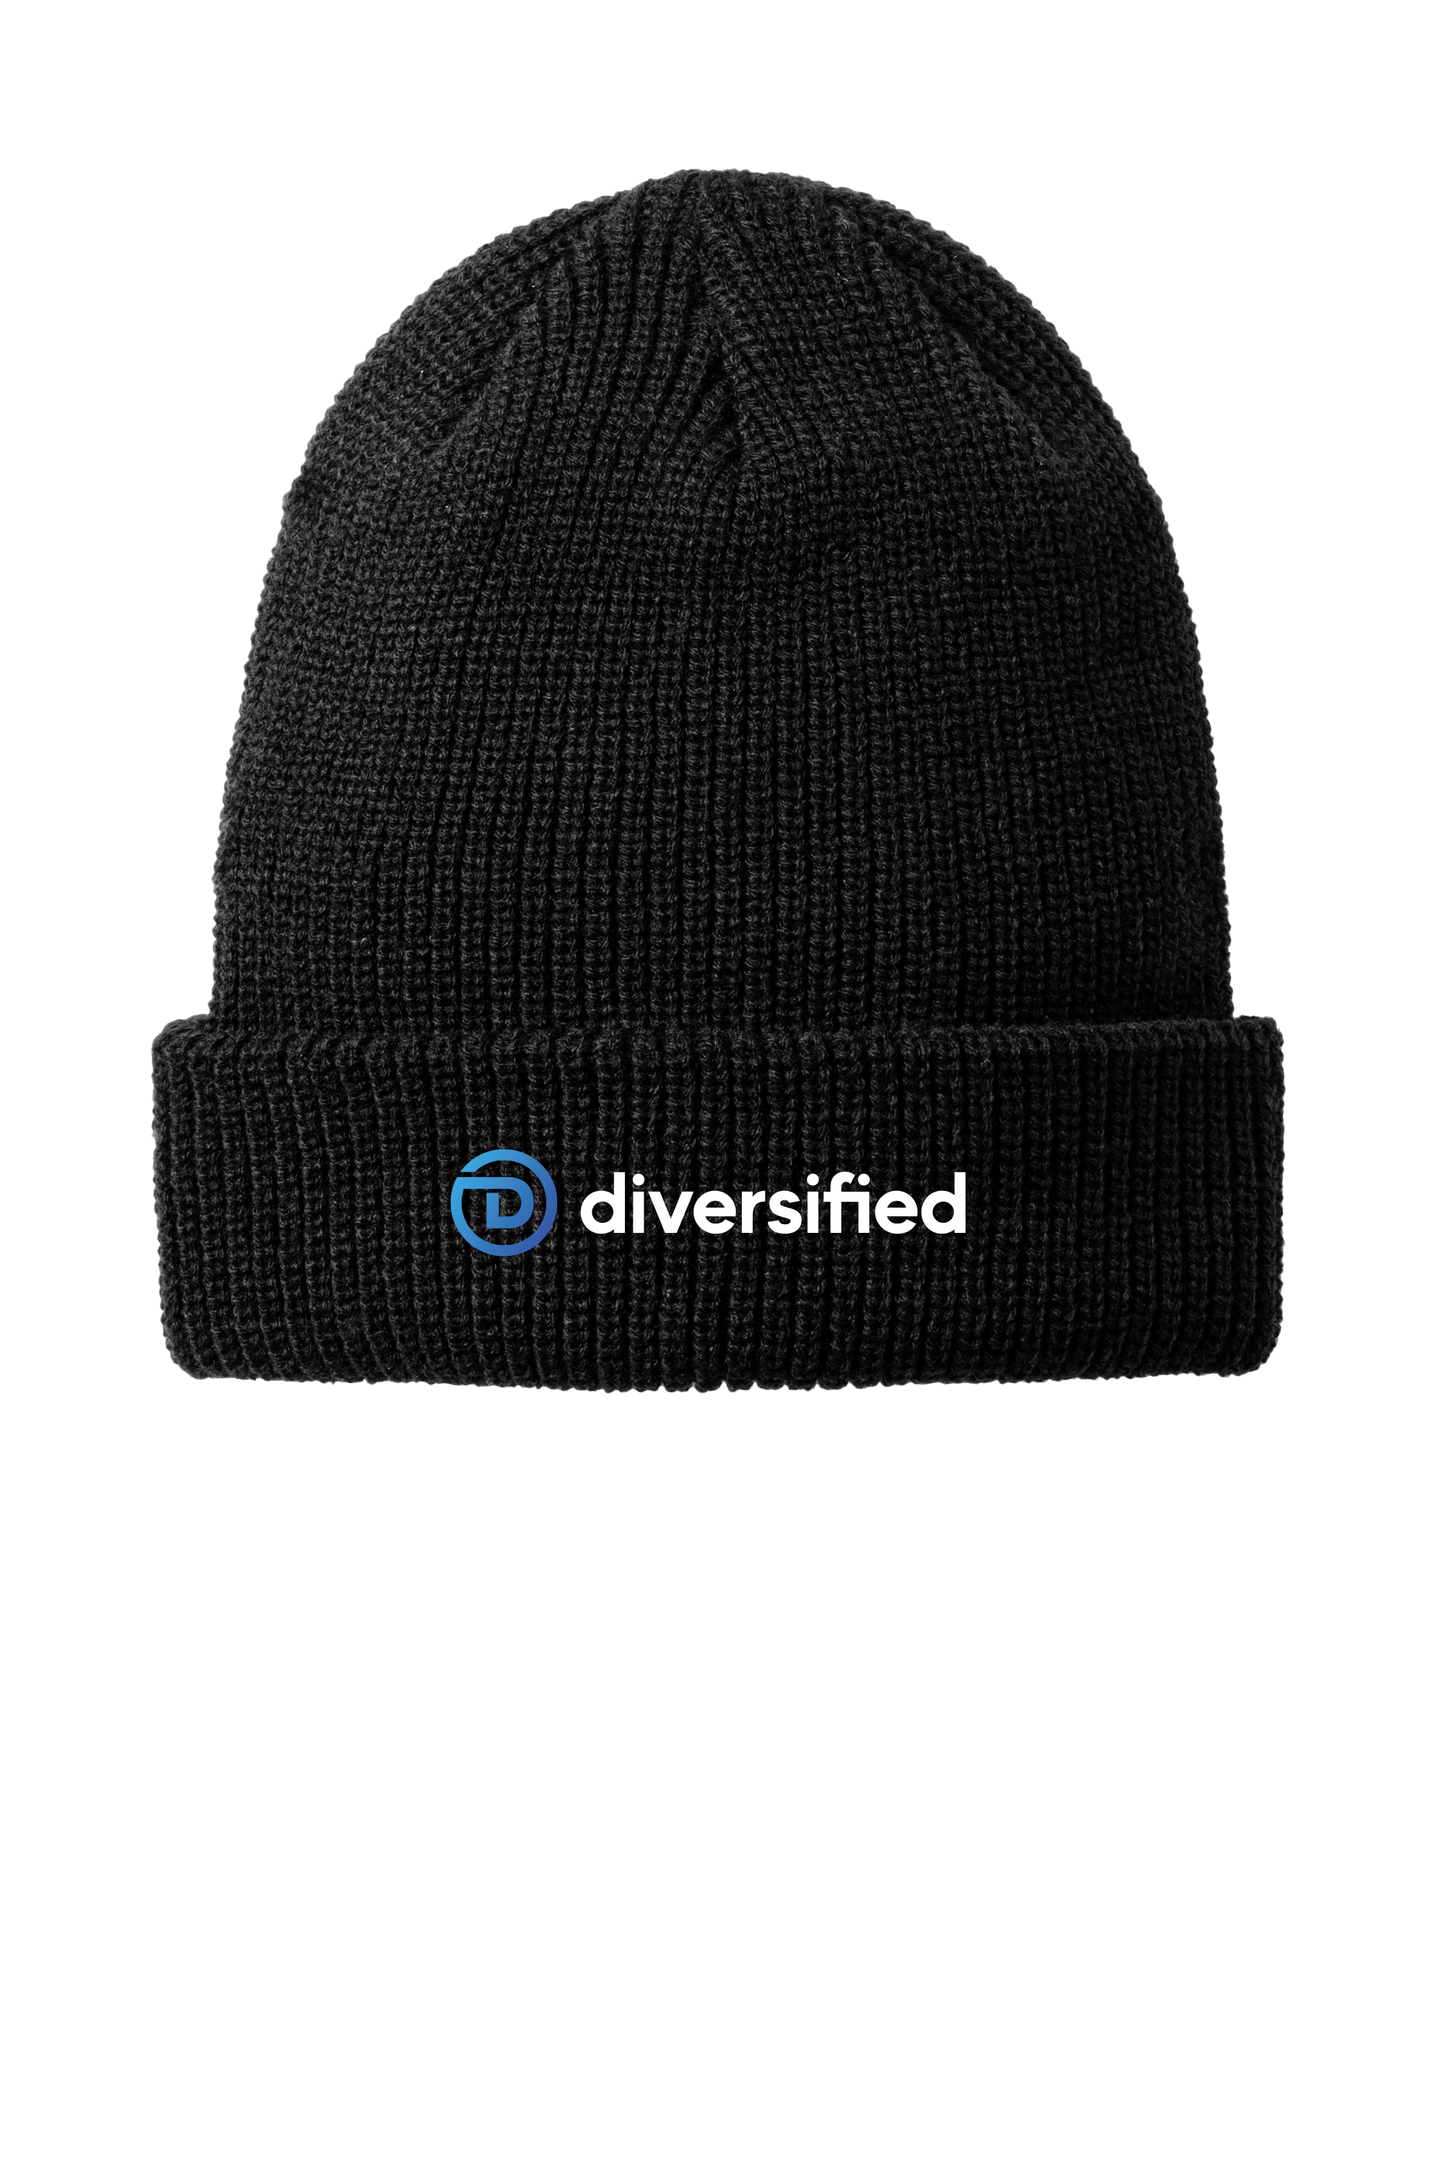 Diversified Chunky Knit Beanie, Port Authority – OneDiversified-Merch